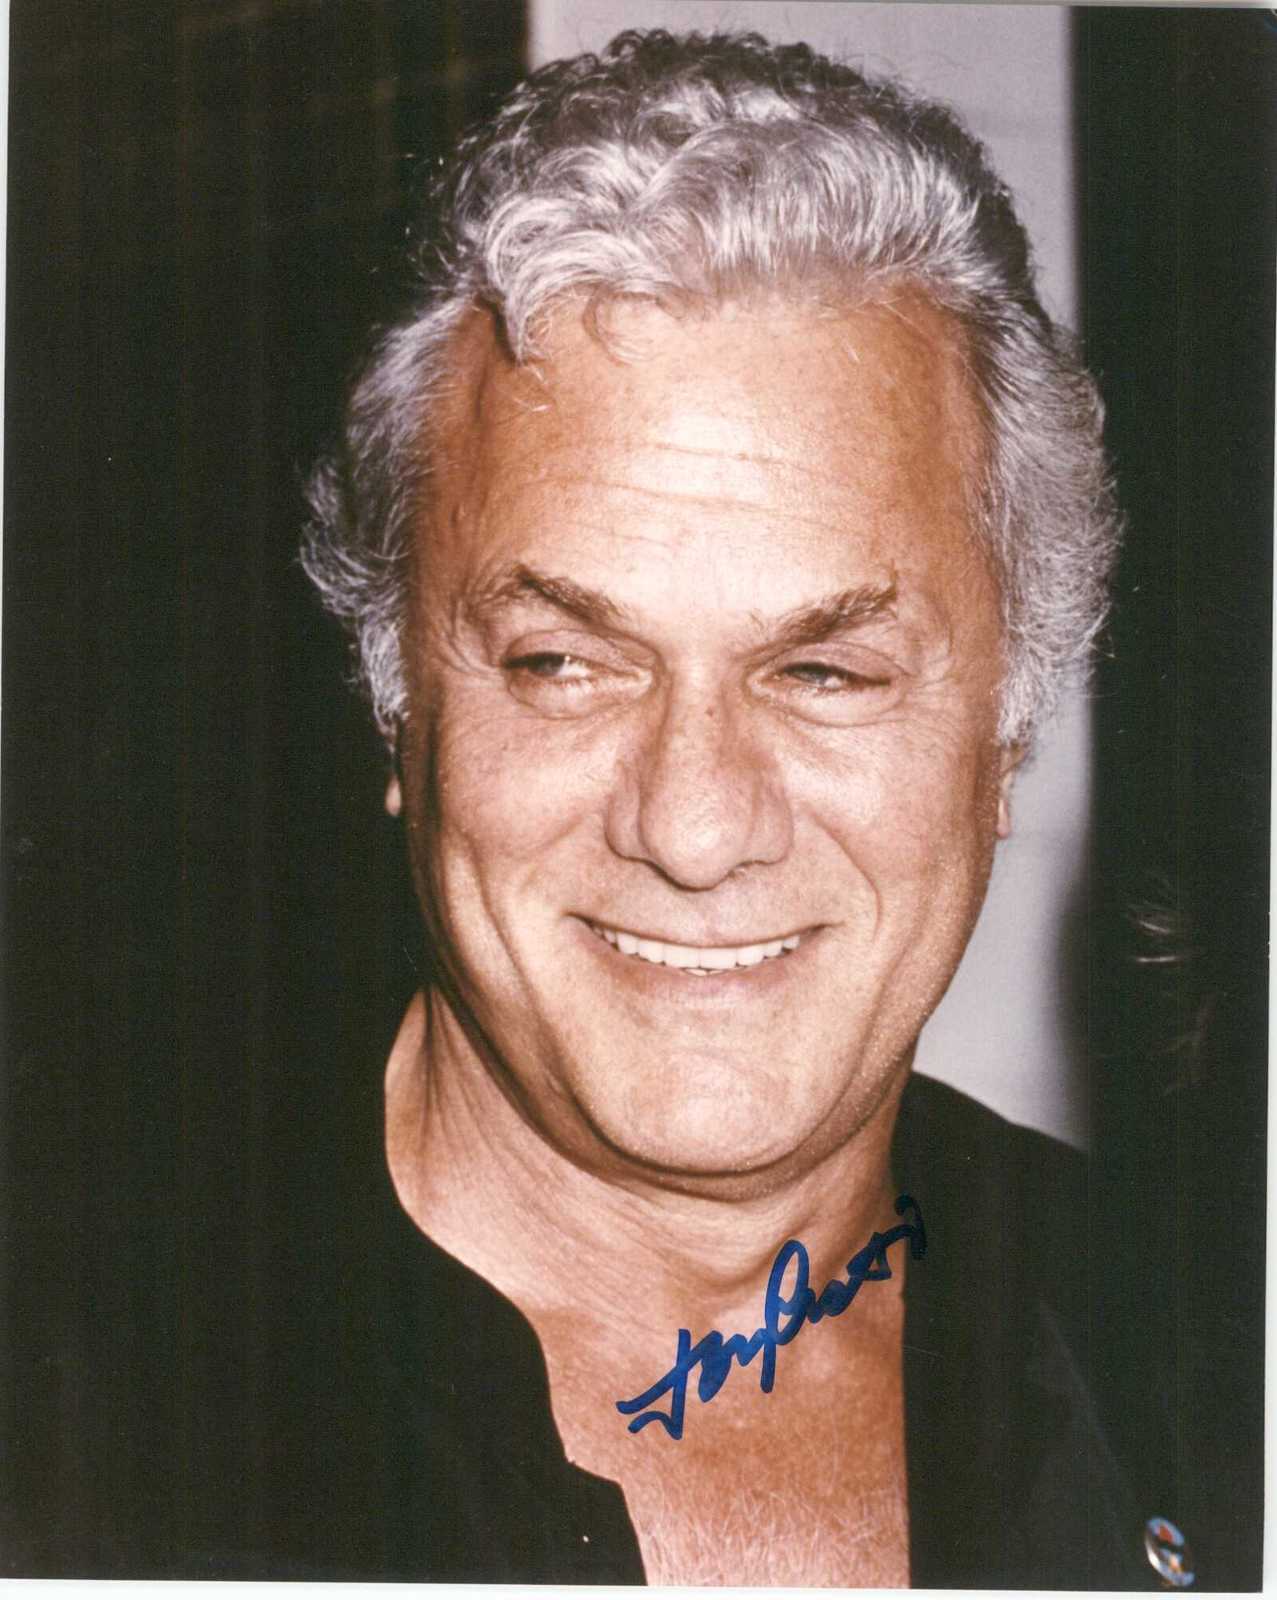 Primary image for Tony Curtis (d. 2010) Signed Autographed Glossy 8x10 Photo